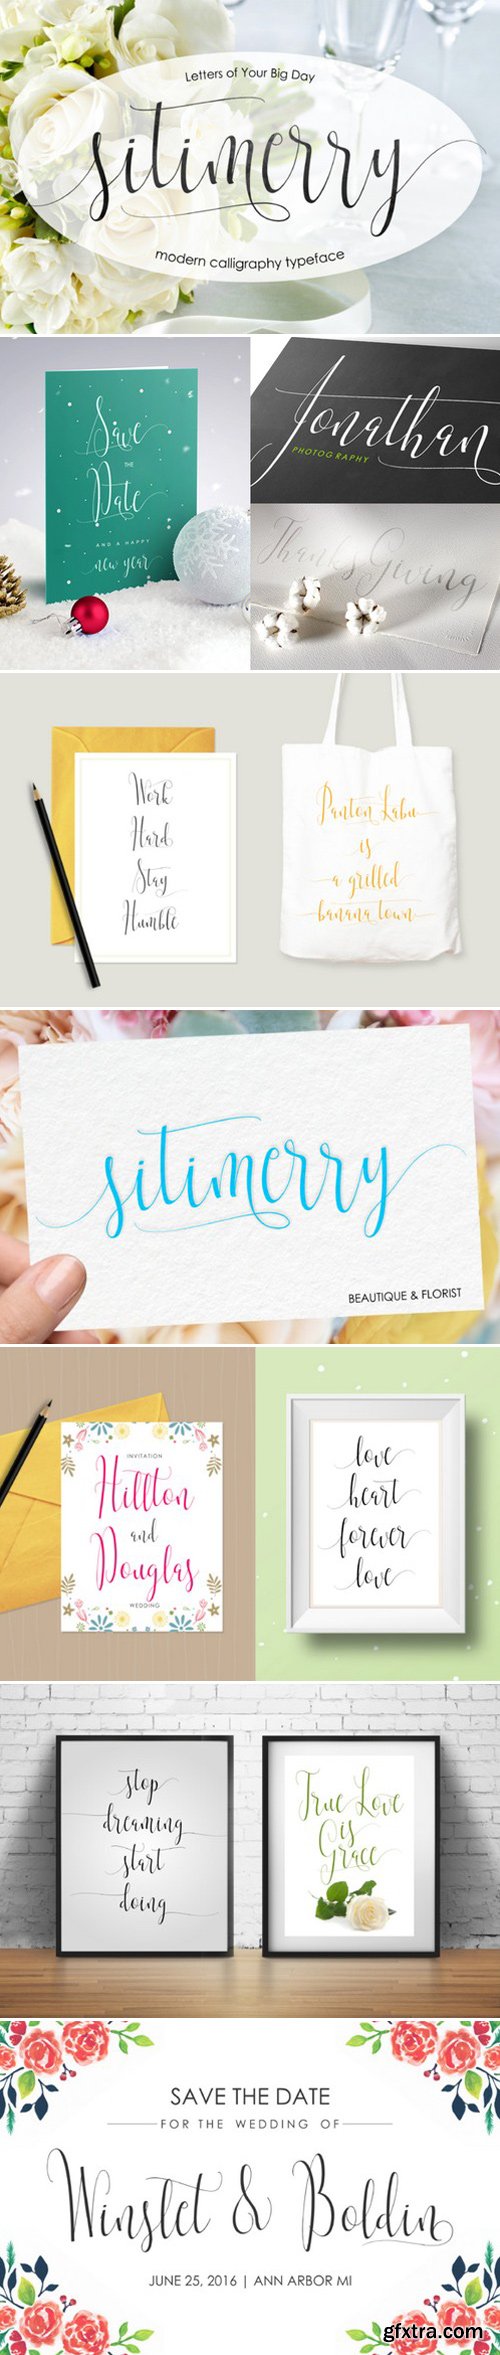 CM - Sitimerry Script for Your Big Day 442801